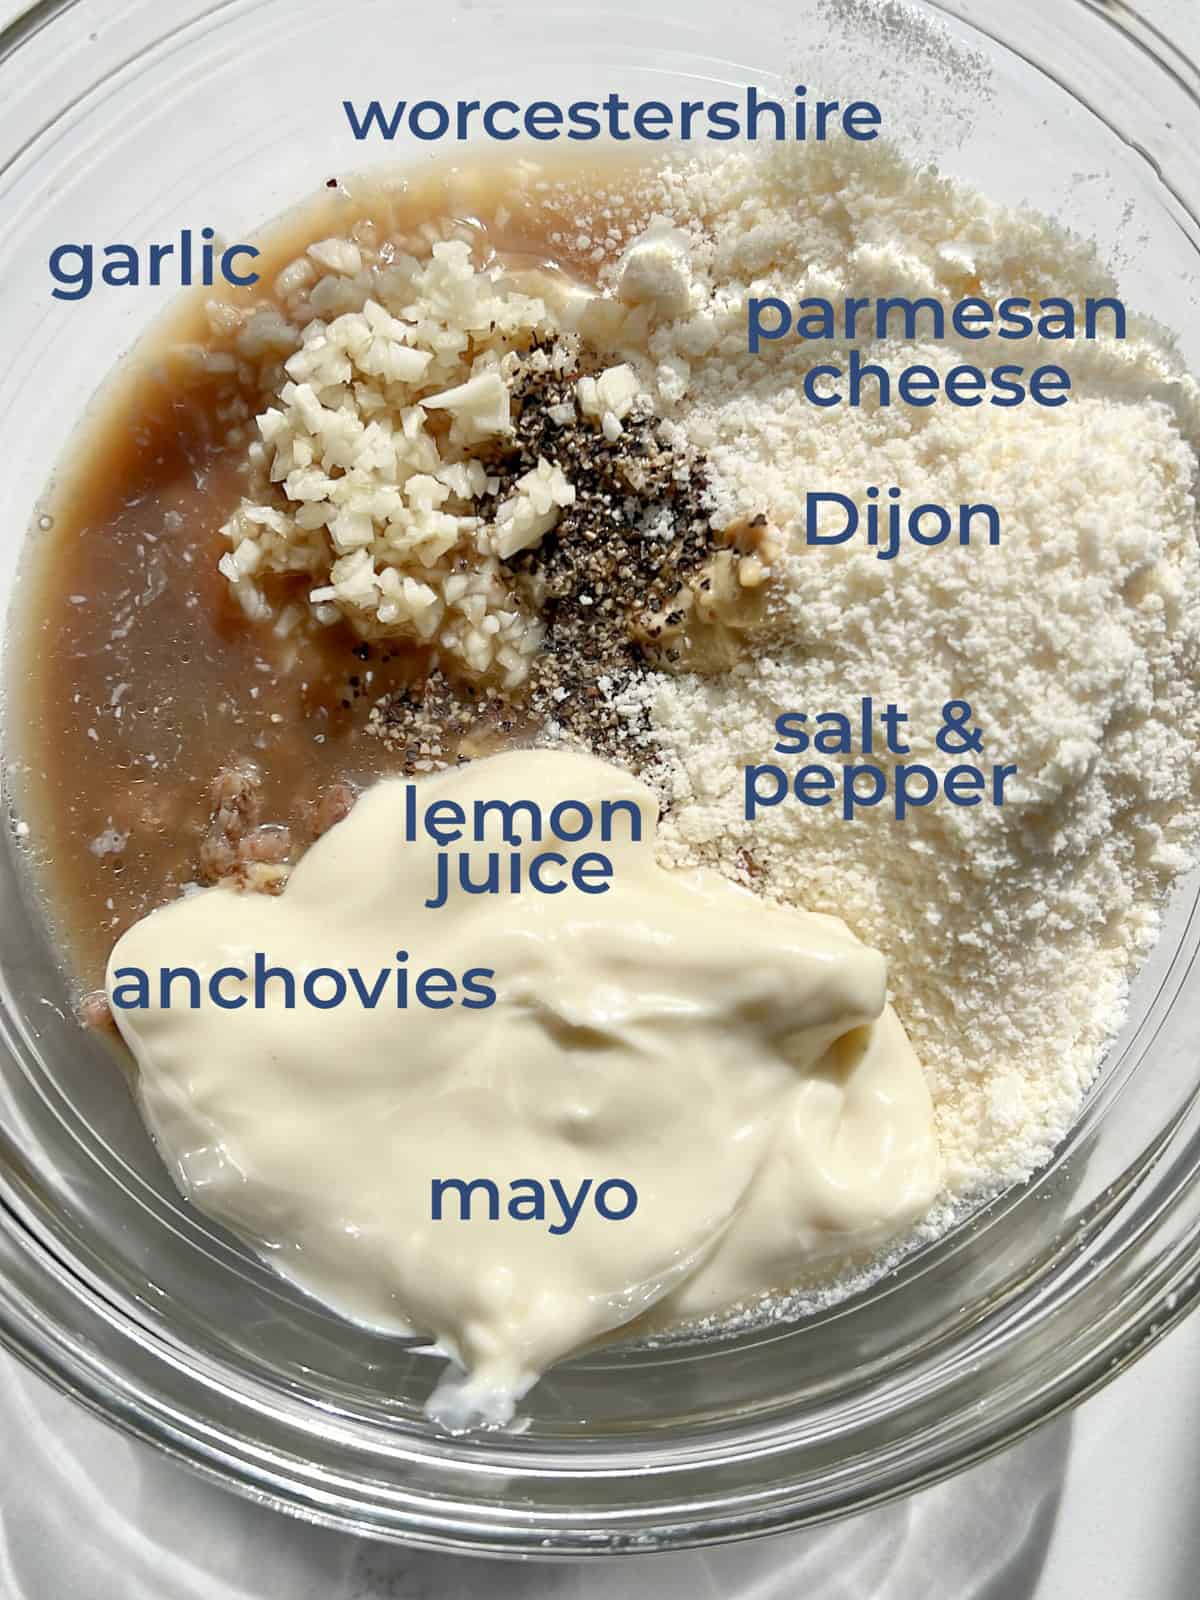 A mixing bowl with mayonnaise, garlic, lemon juice, Worcestershire sauce, salt, pepper, dijon, anchovies and garlic in it.